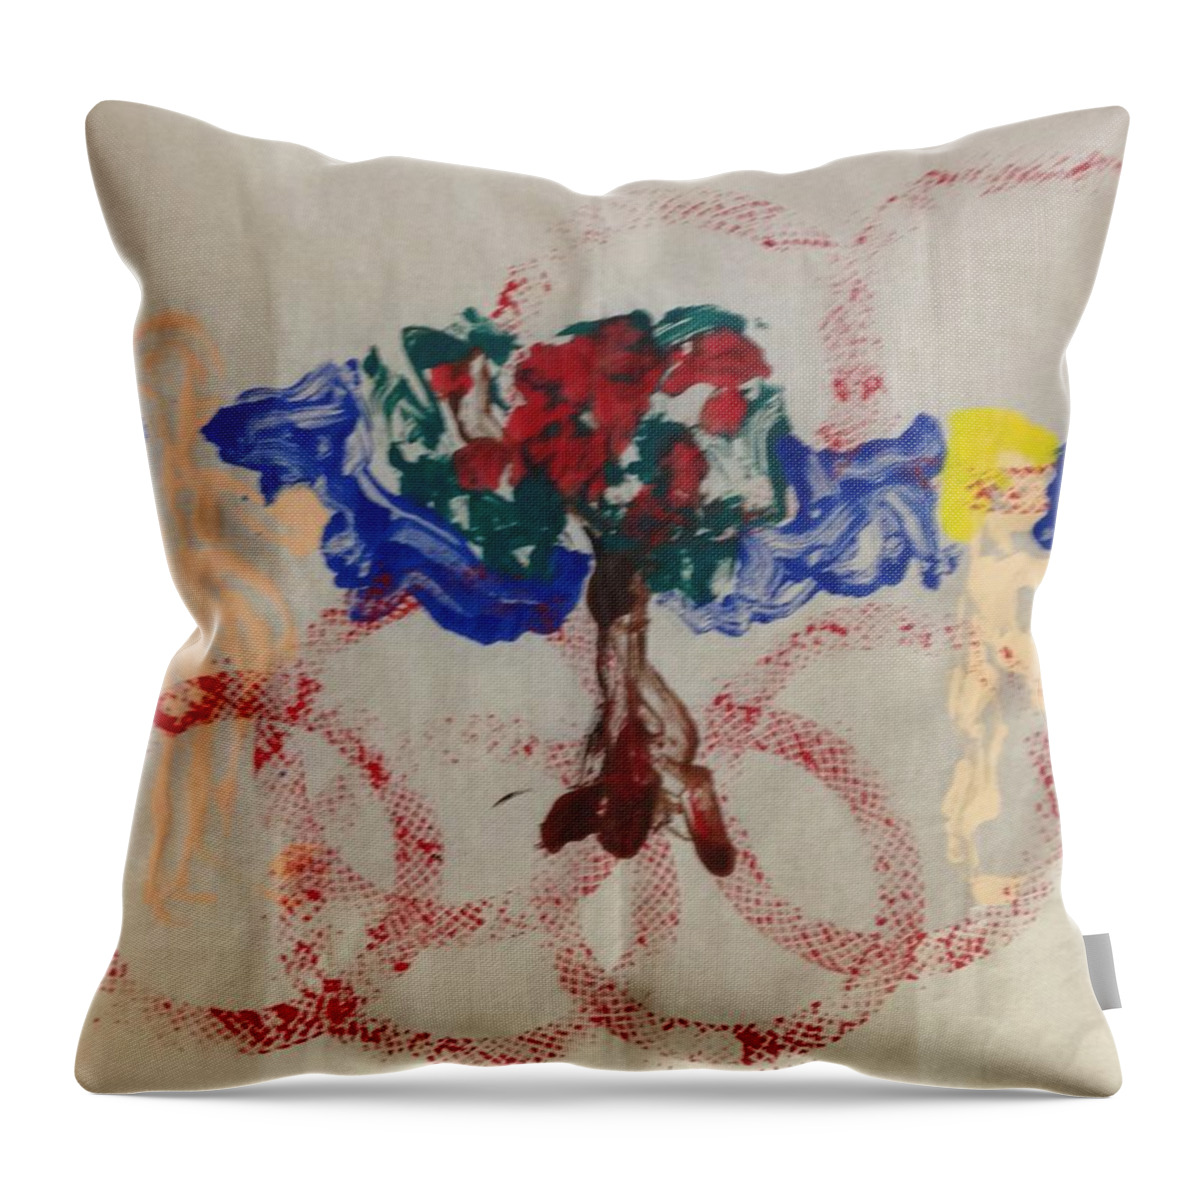 Rings Throw Pillow featuring the painting Apple Rings by Erika Jean Chamberlin